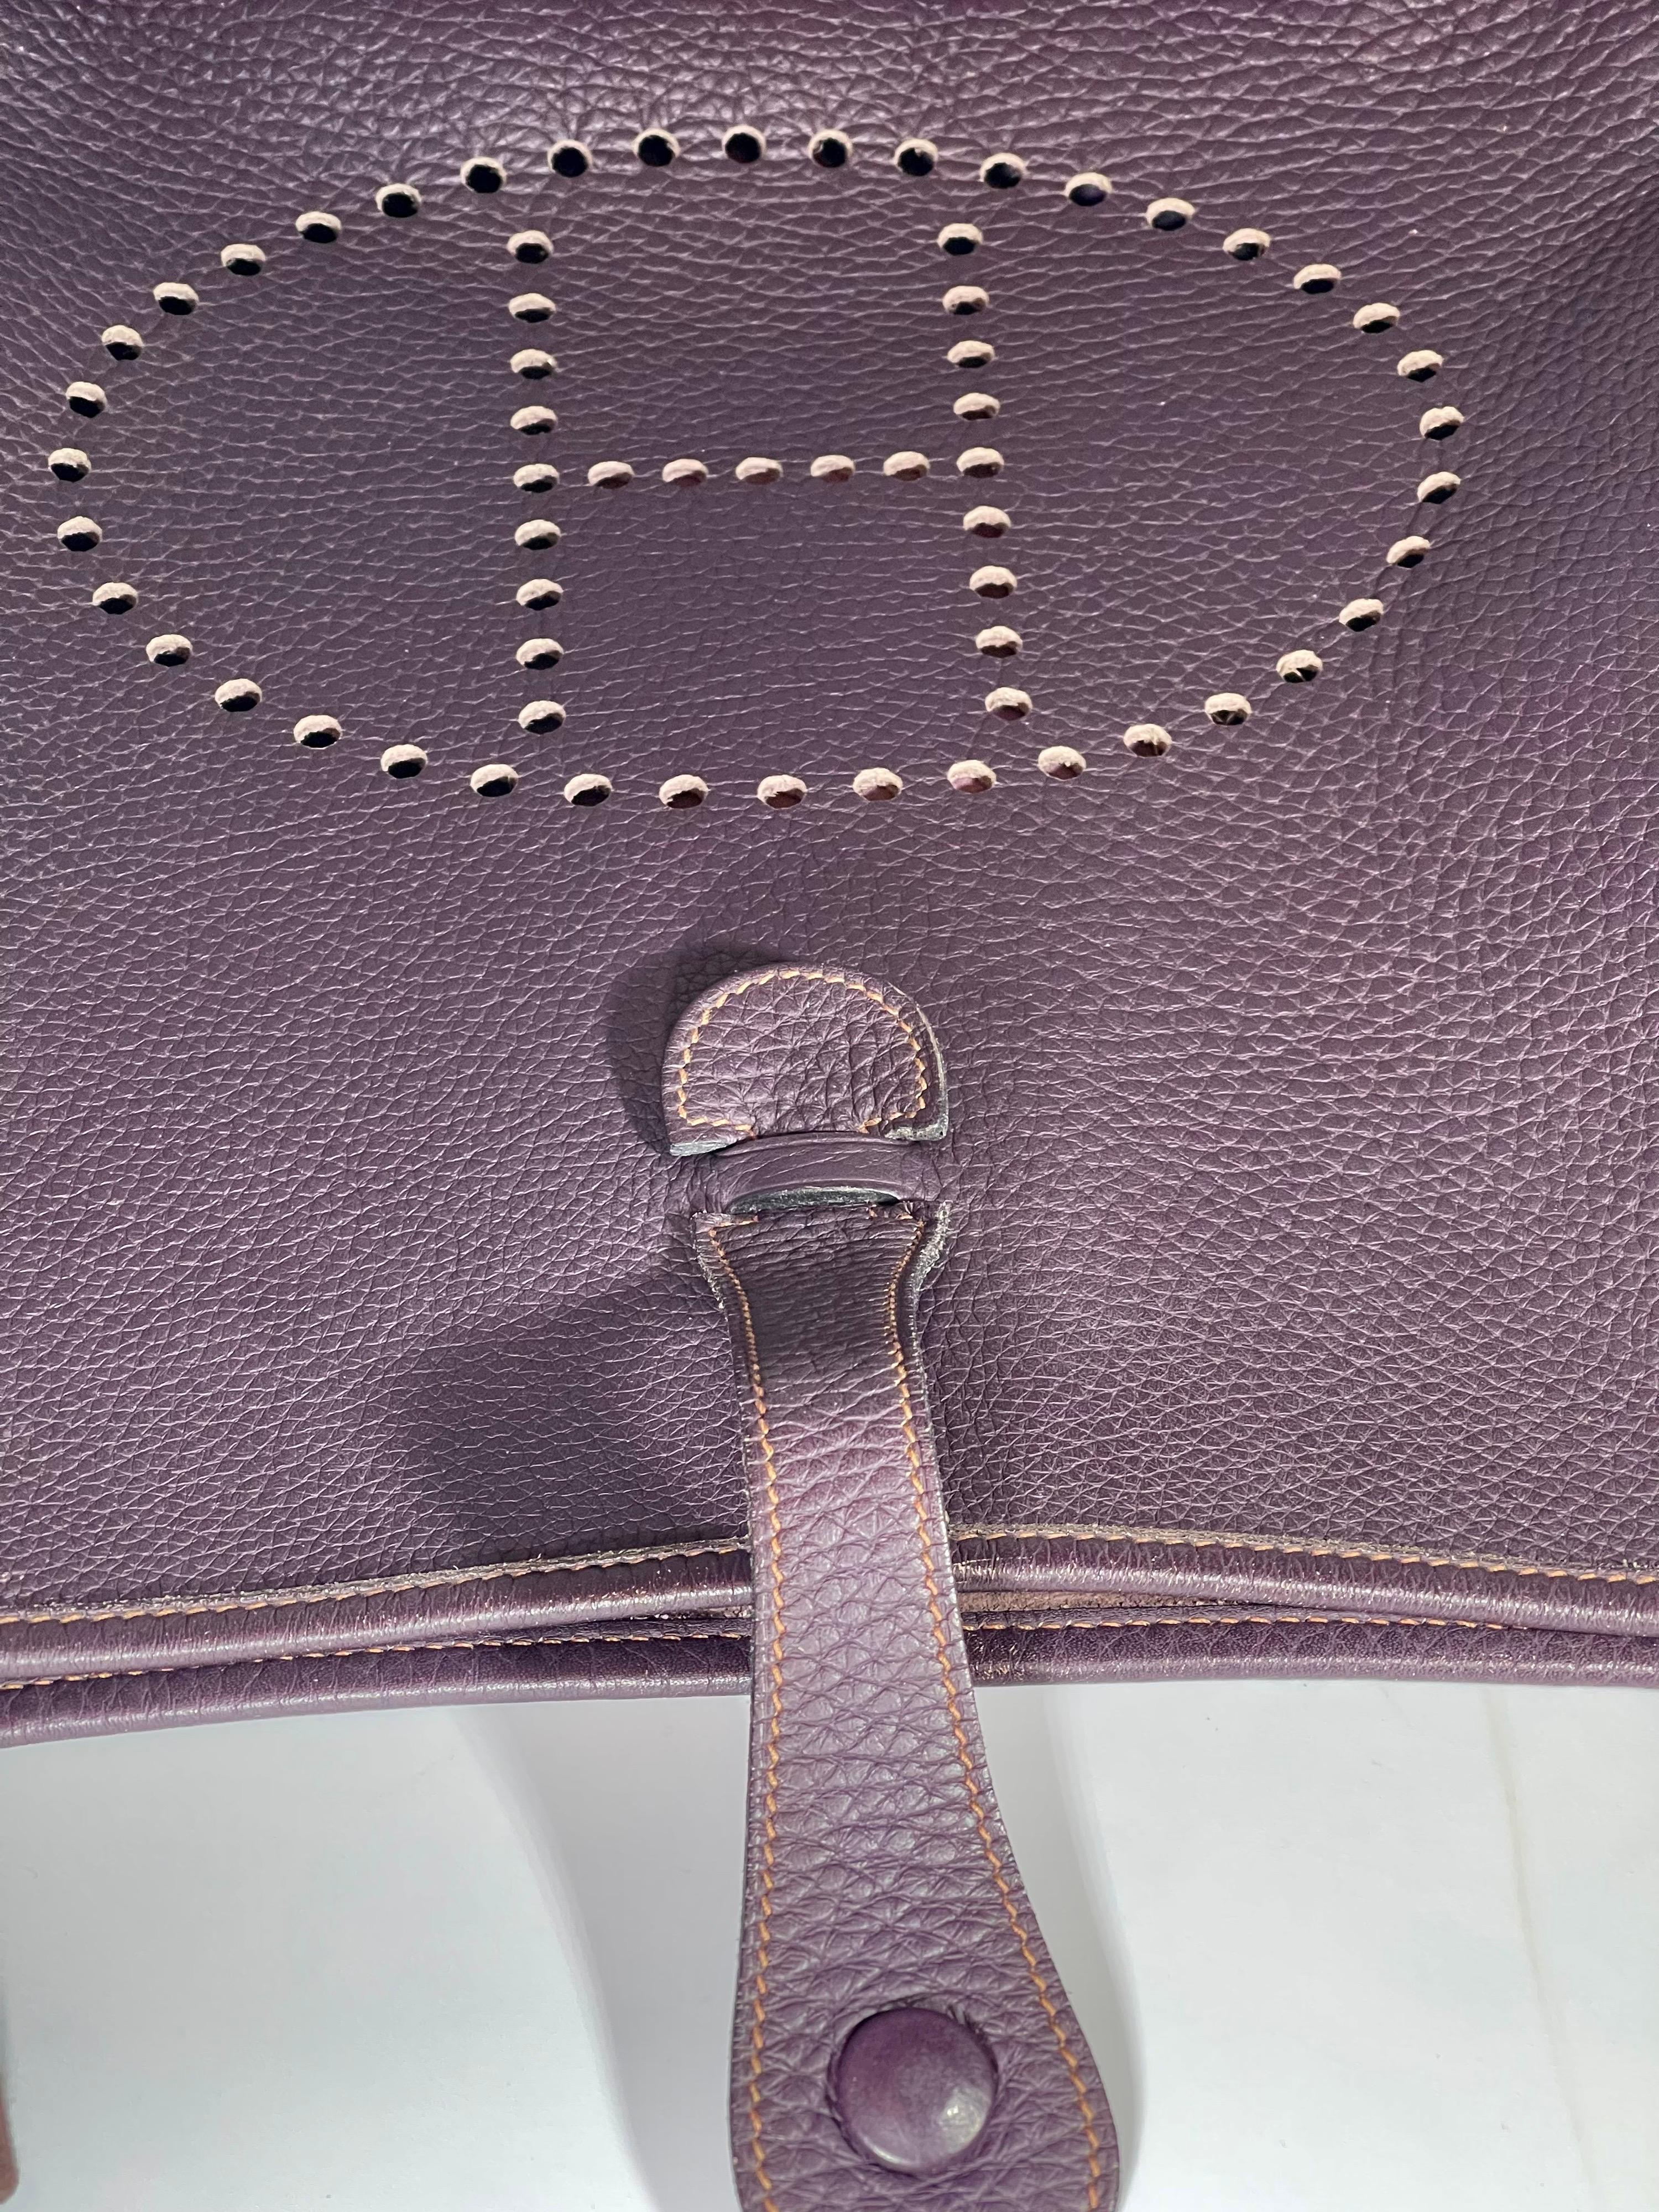 Pictures are not doing justice with the bag 
its almost new bag and it is in excellent shape 
Hermès Evelyne Pm Brown Leather Cross Body Bag 
Cross-Body Dark Brown / Chocc`olate Leather Messenger Bag 
Most desirable and Convenient cross body bag
